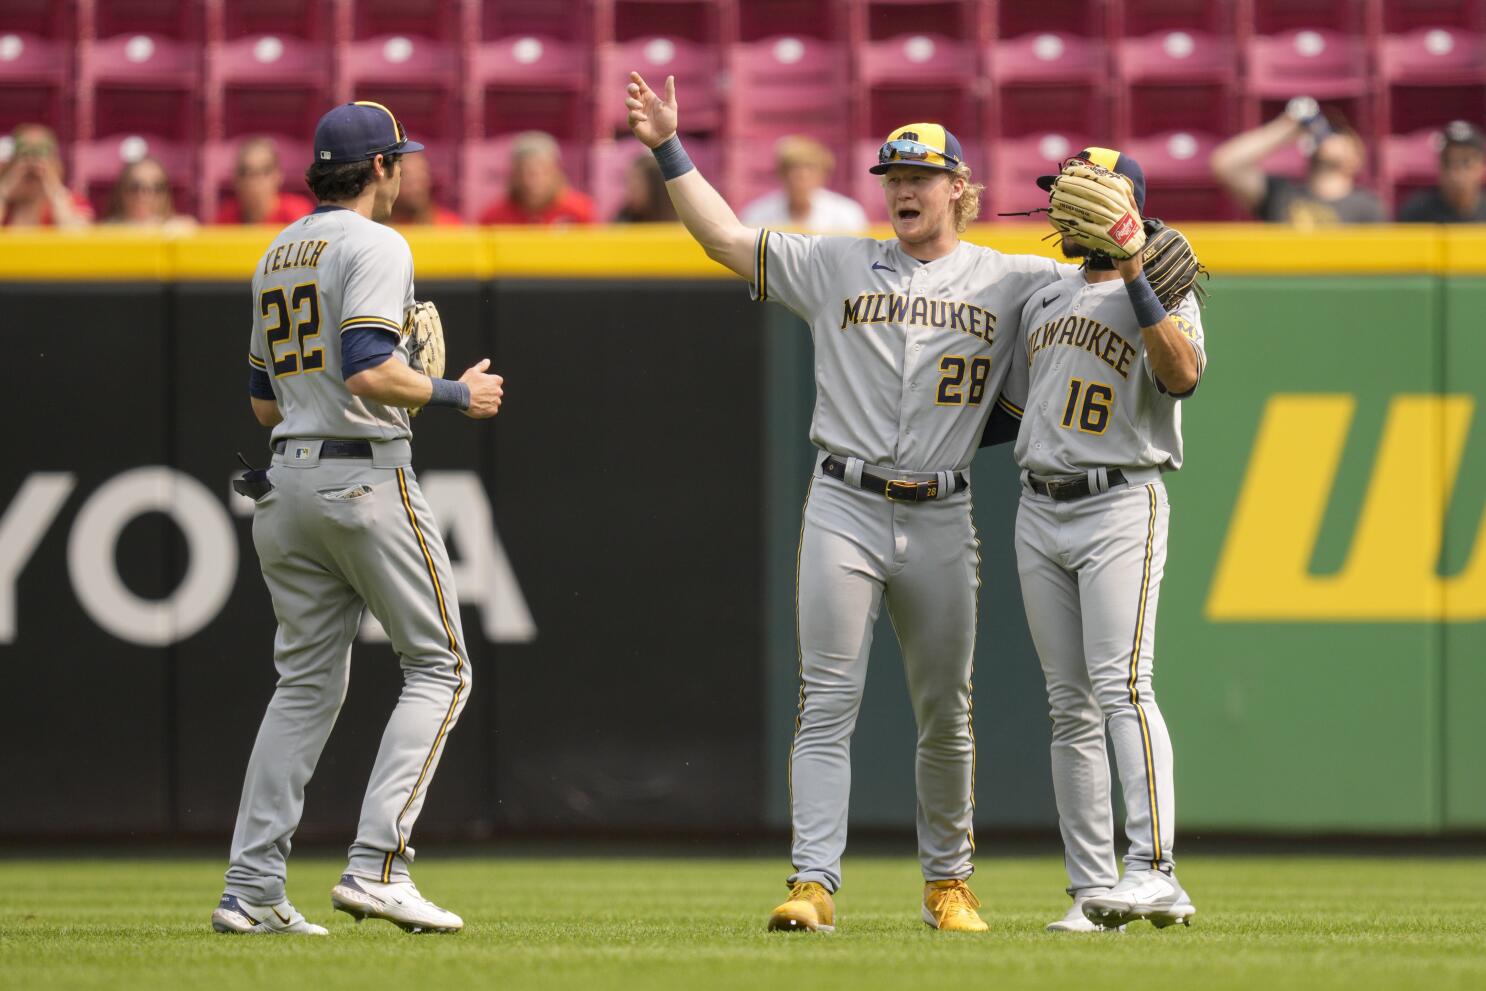 Brewers road trip recap: Sweep of Reds gives Milwaukee winning trip